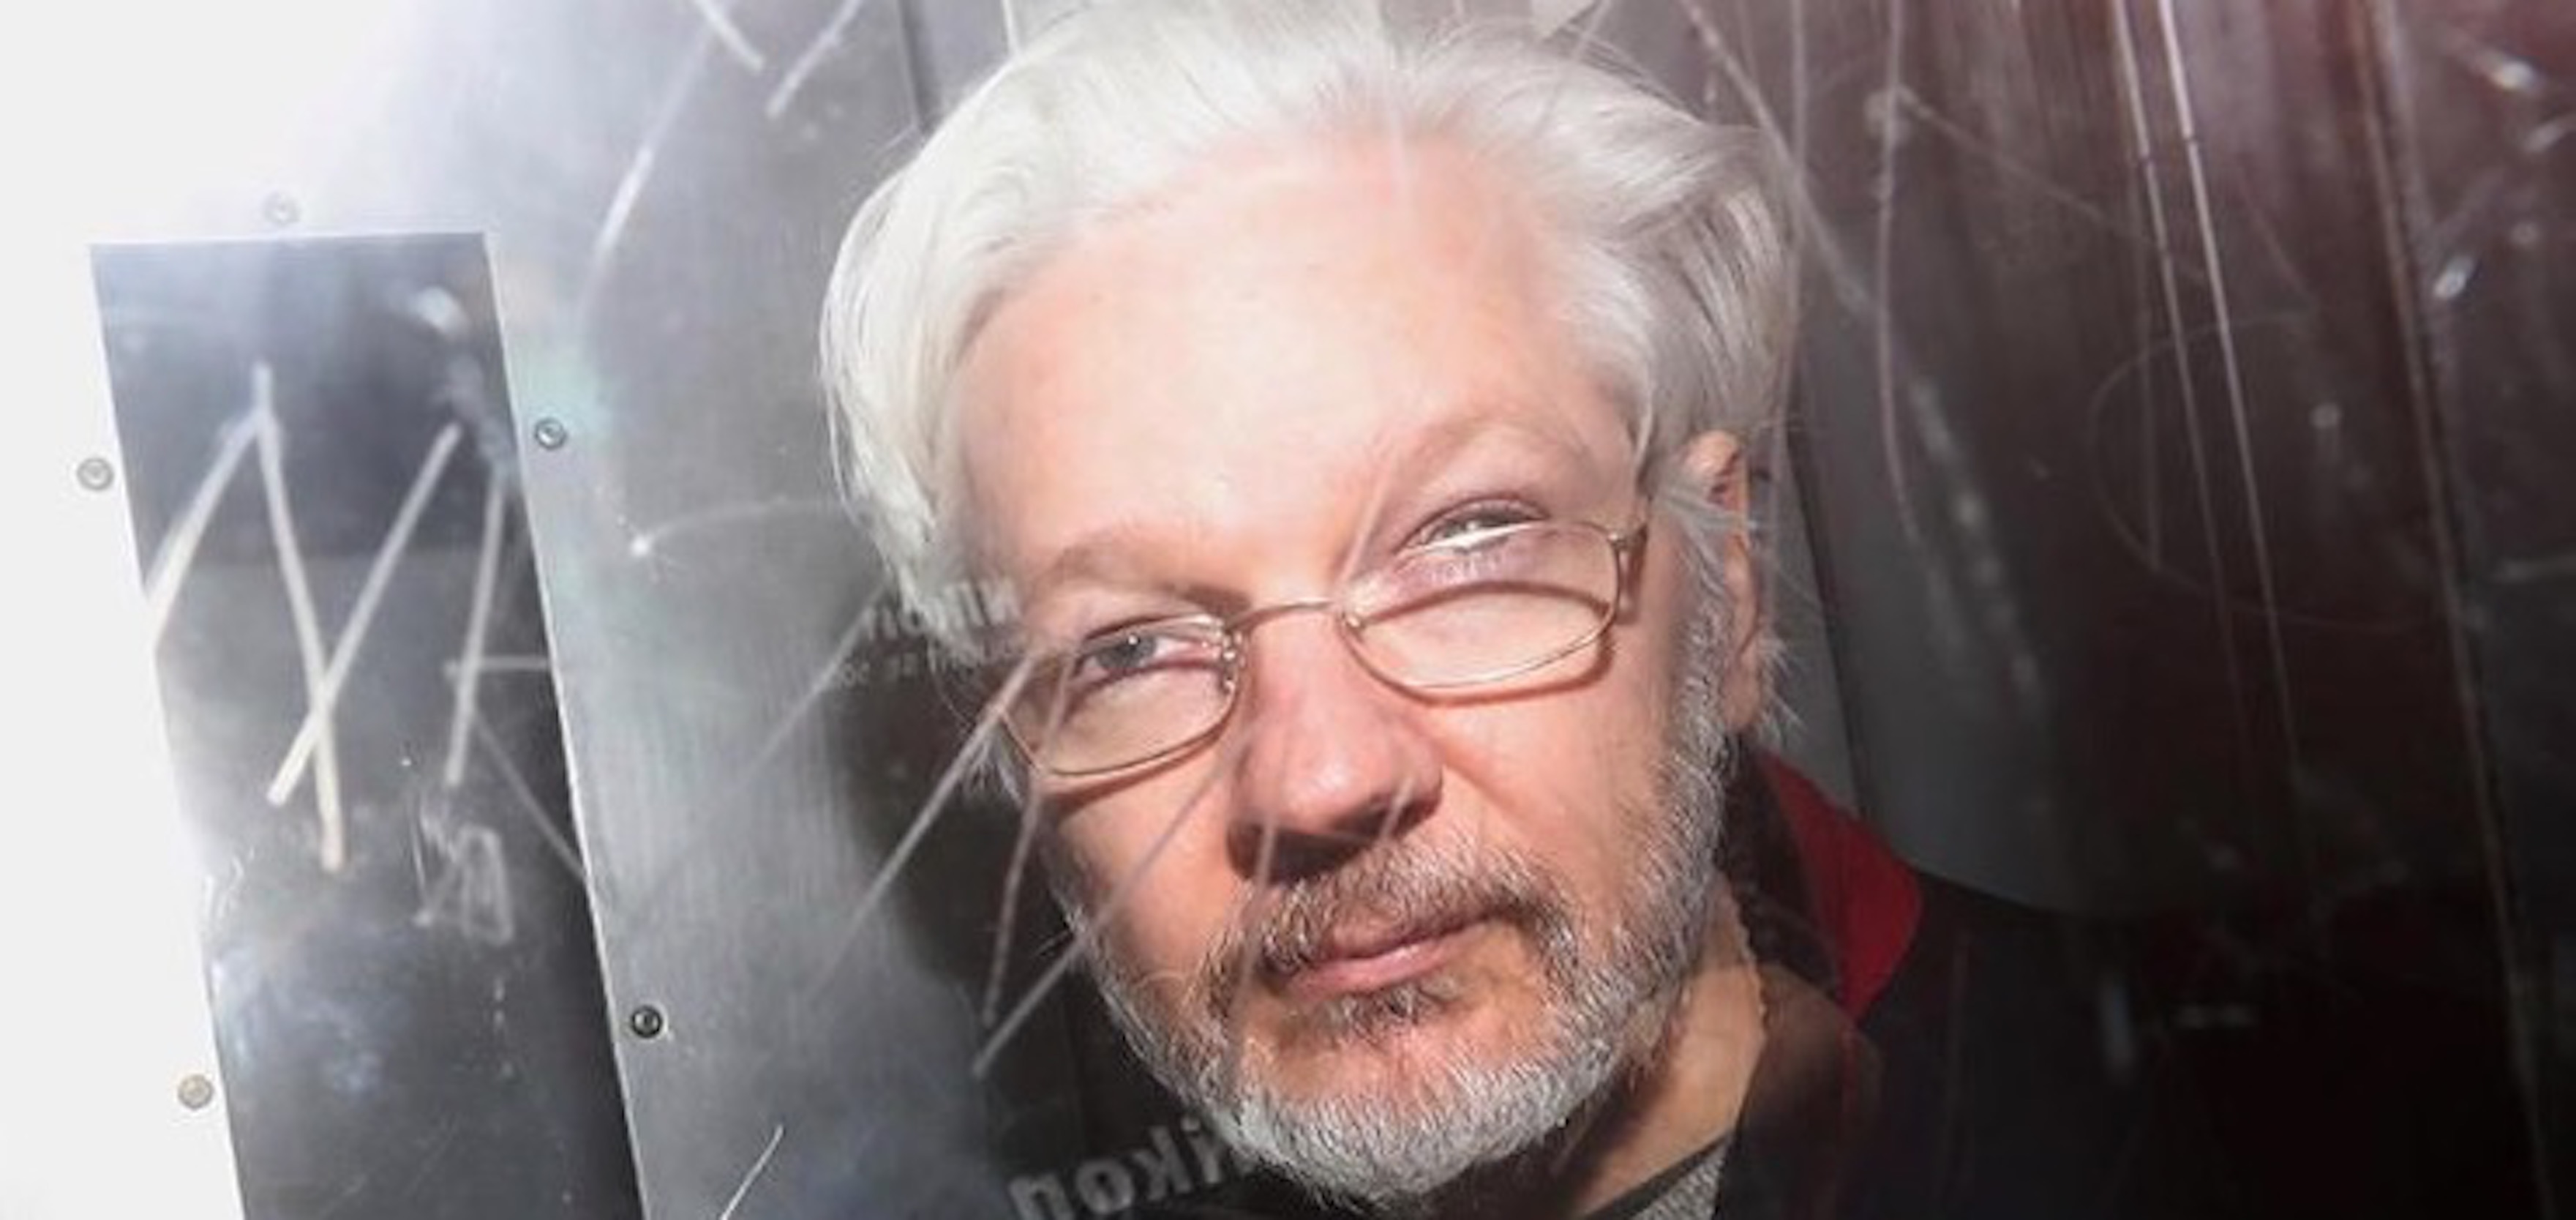 Eyewitness to the Agony of Julian Assange